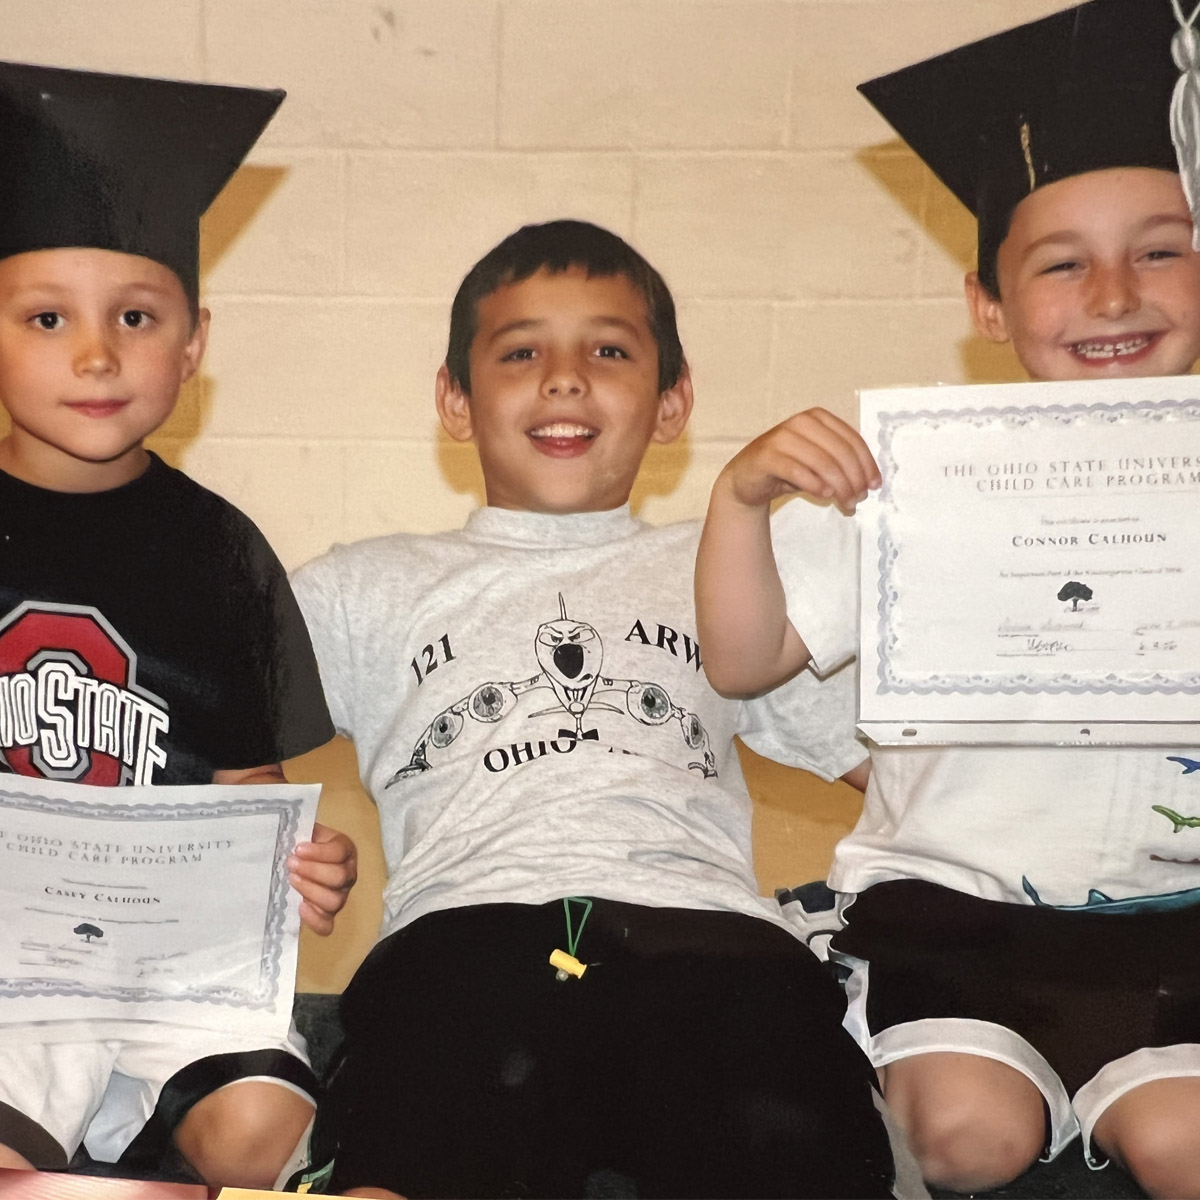 On a bench sit three boys. Two wear graduation caps and show off certificates, and the one between them has his arms wrapped around his brothers’ shoulders. He’s smiling, as is the boy on his left. The expression of the one on the right says he is less enthused, at least at the moment the photo was snapped. 